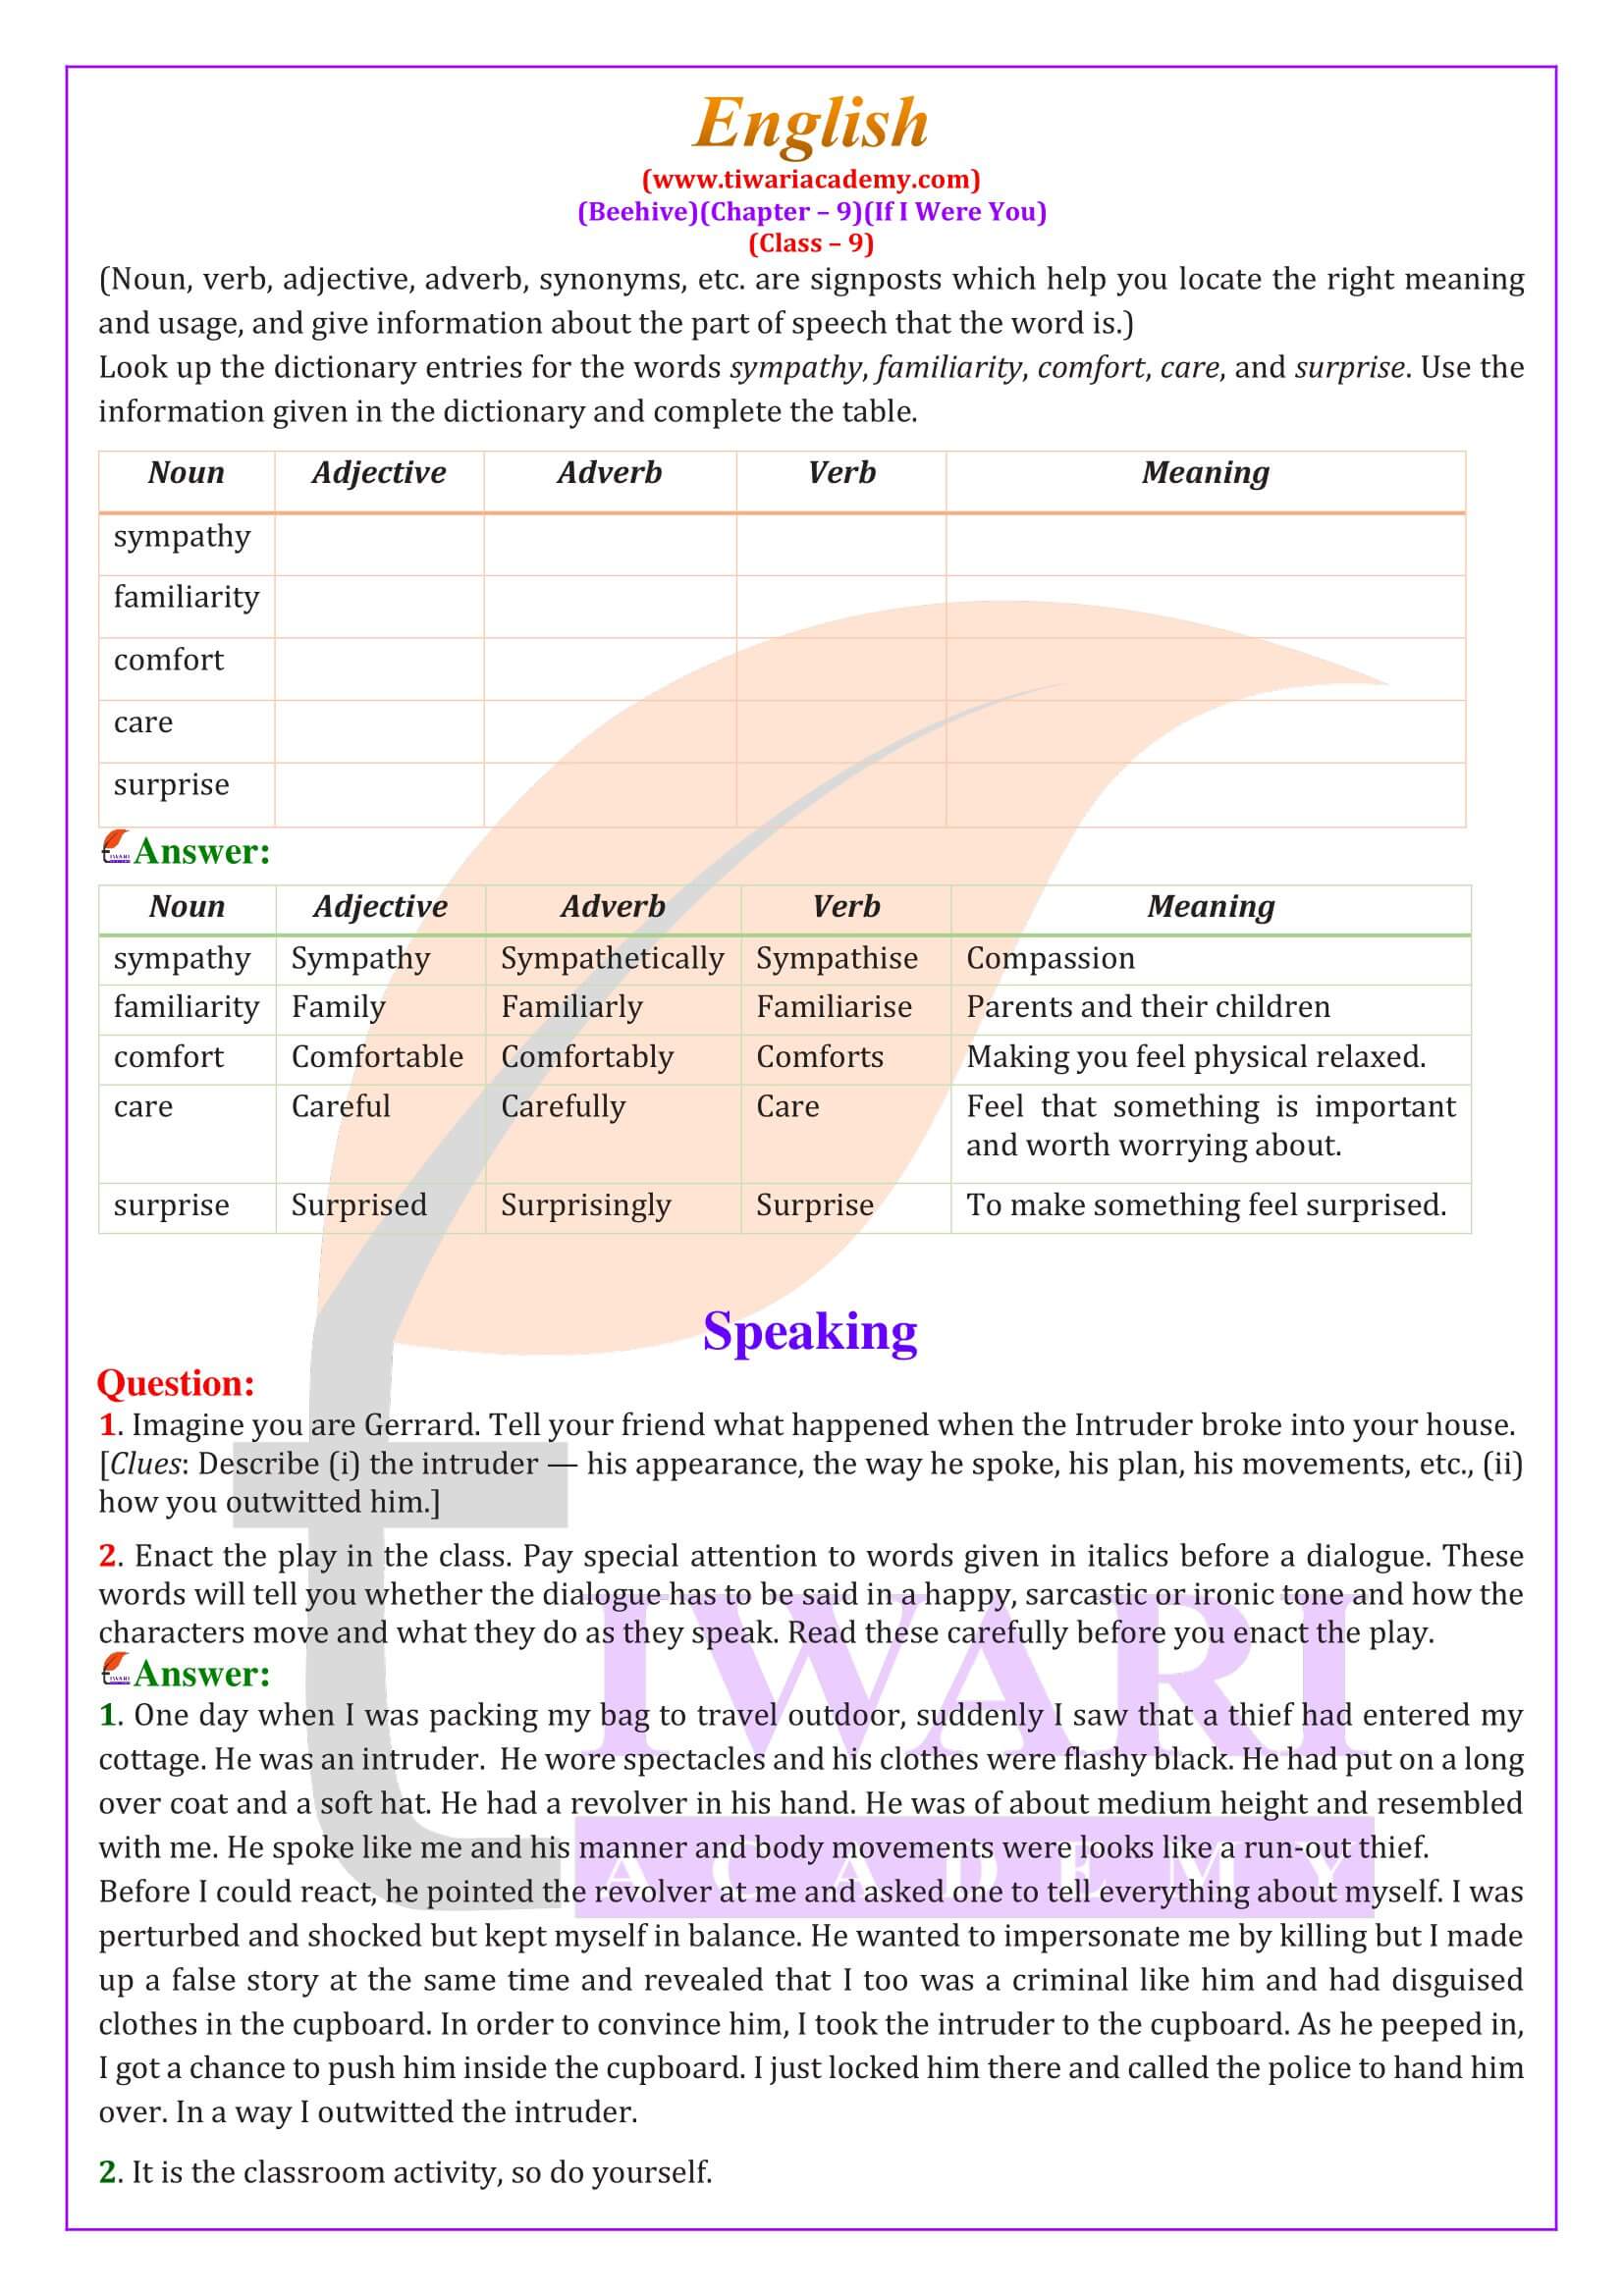 Class 9 English Beehive Chapter 9